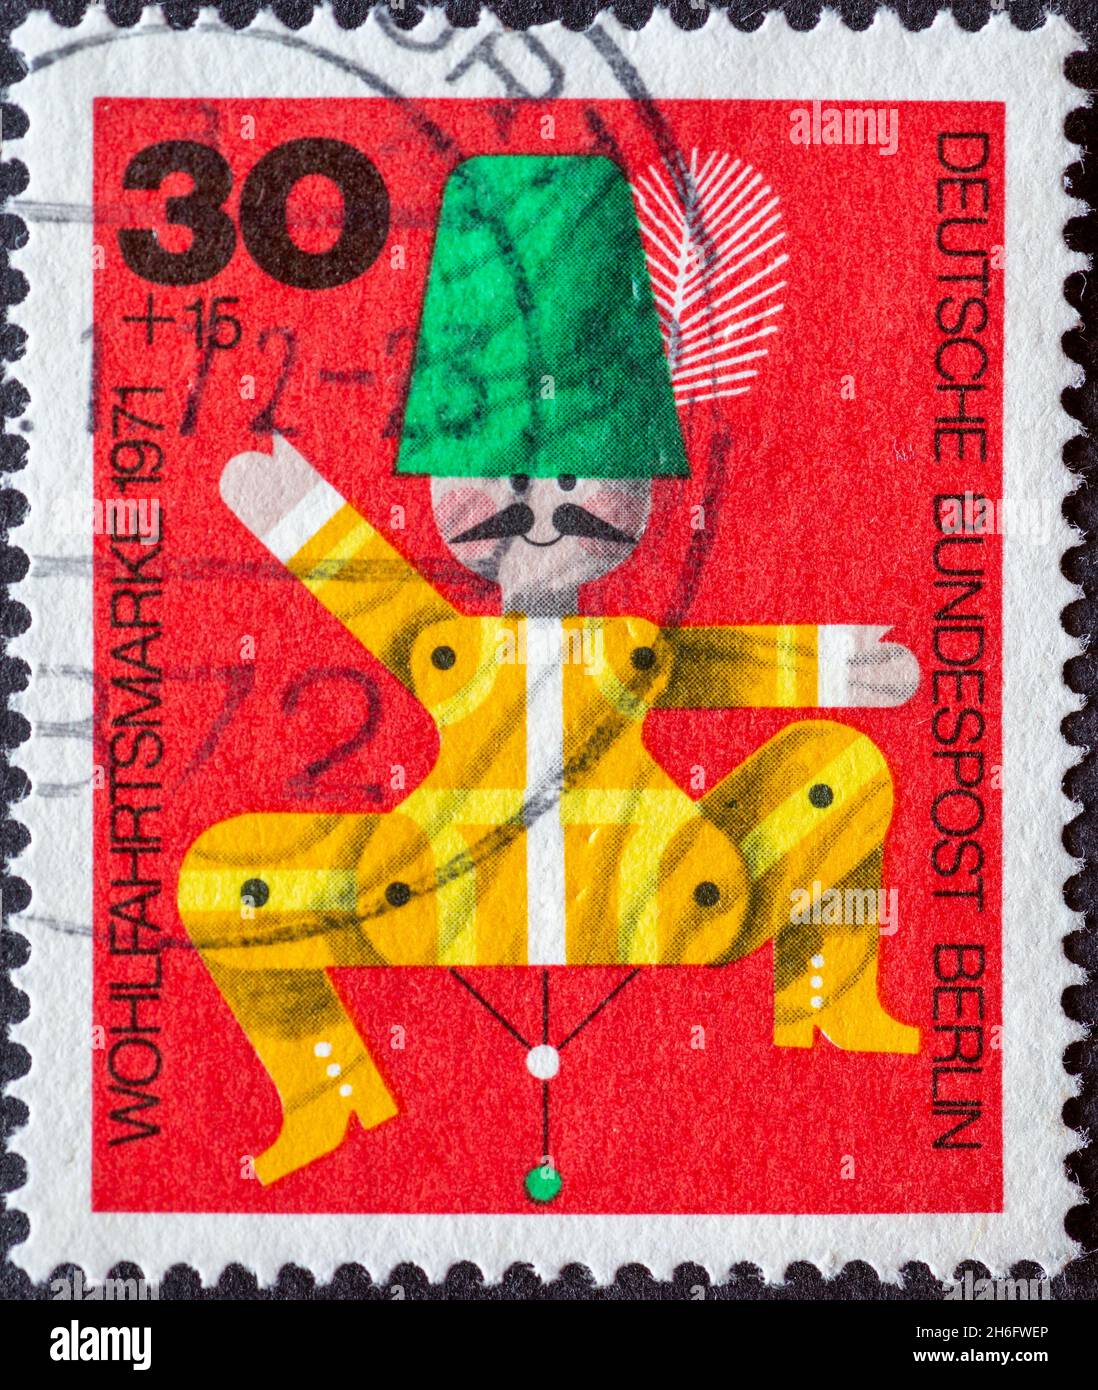 GERMANY, Berlin - CIRCA 1971: a postage stamp from Germany, Berlin showing a 1971 charity postal stamp with old wooden toys. Here: Hampel or Zappelman Stock Photo